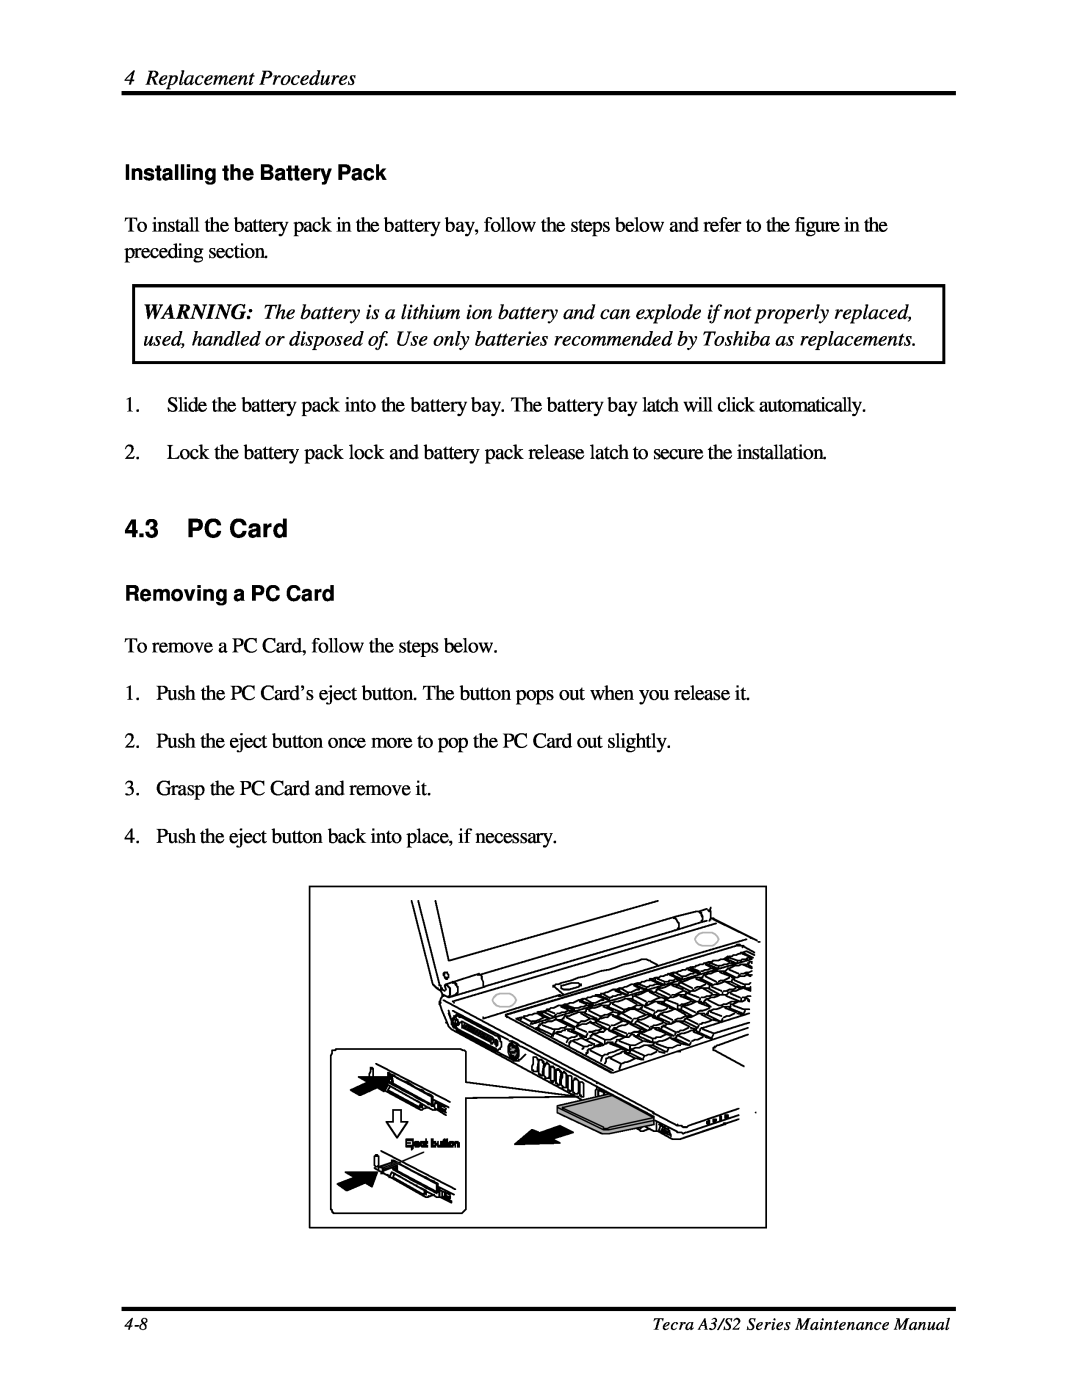 Toshiba S2 manual Installing the Battery Pack, Removing a PC Card, Replacement Procedures 